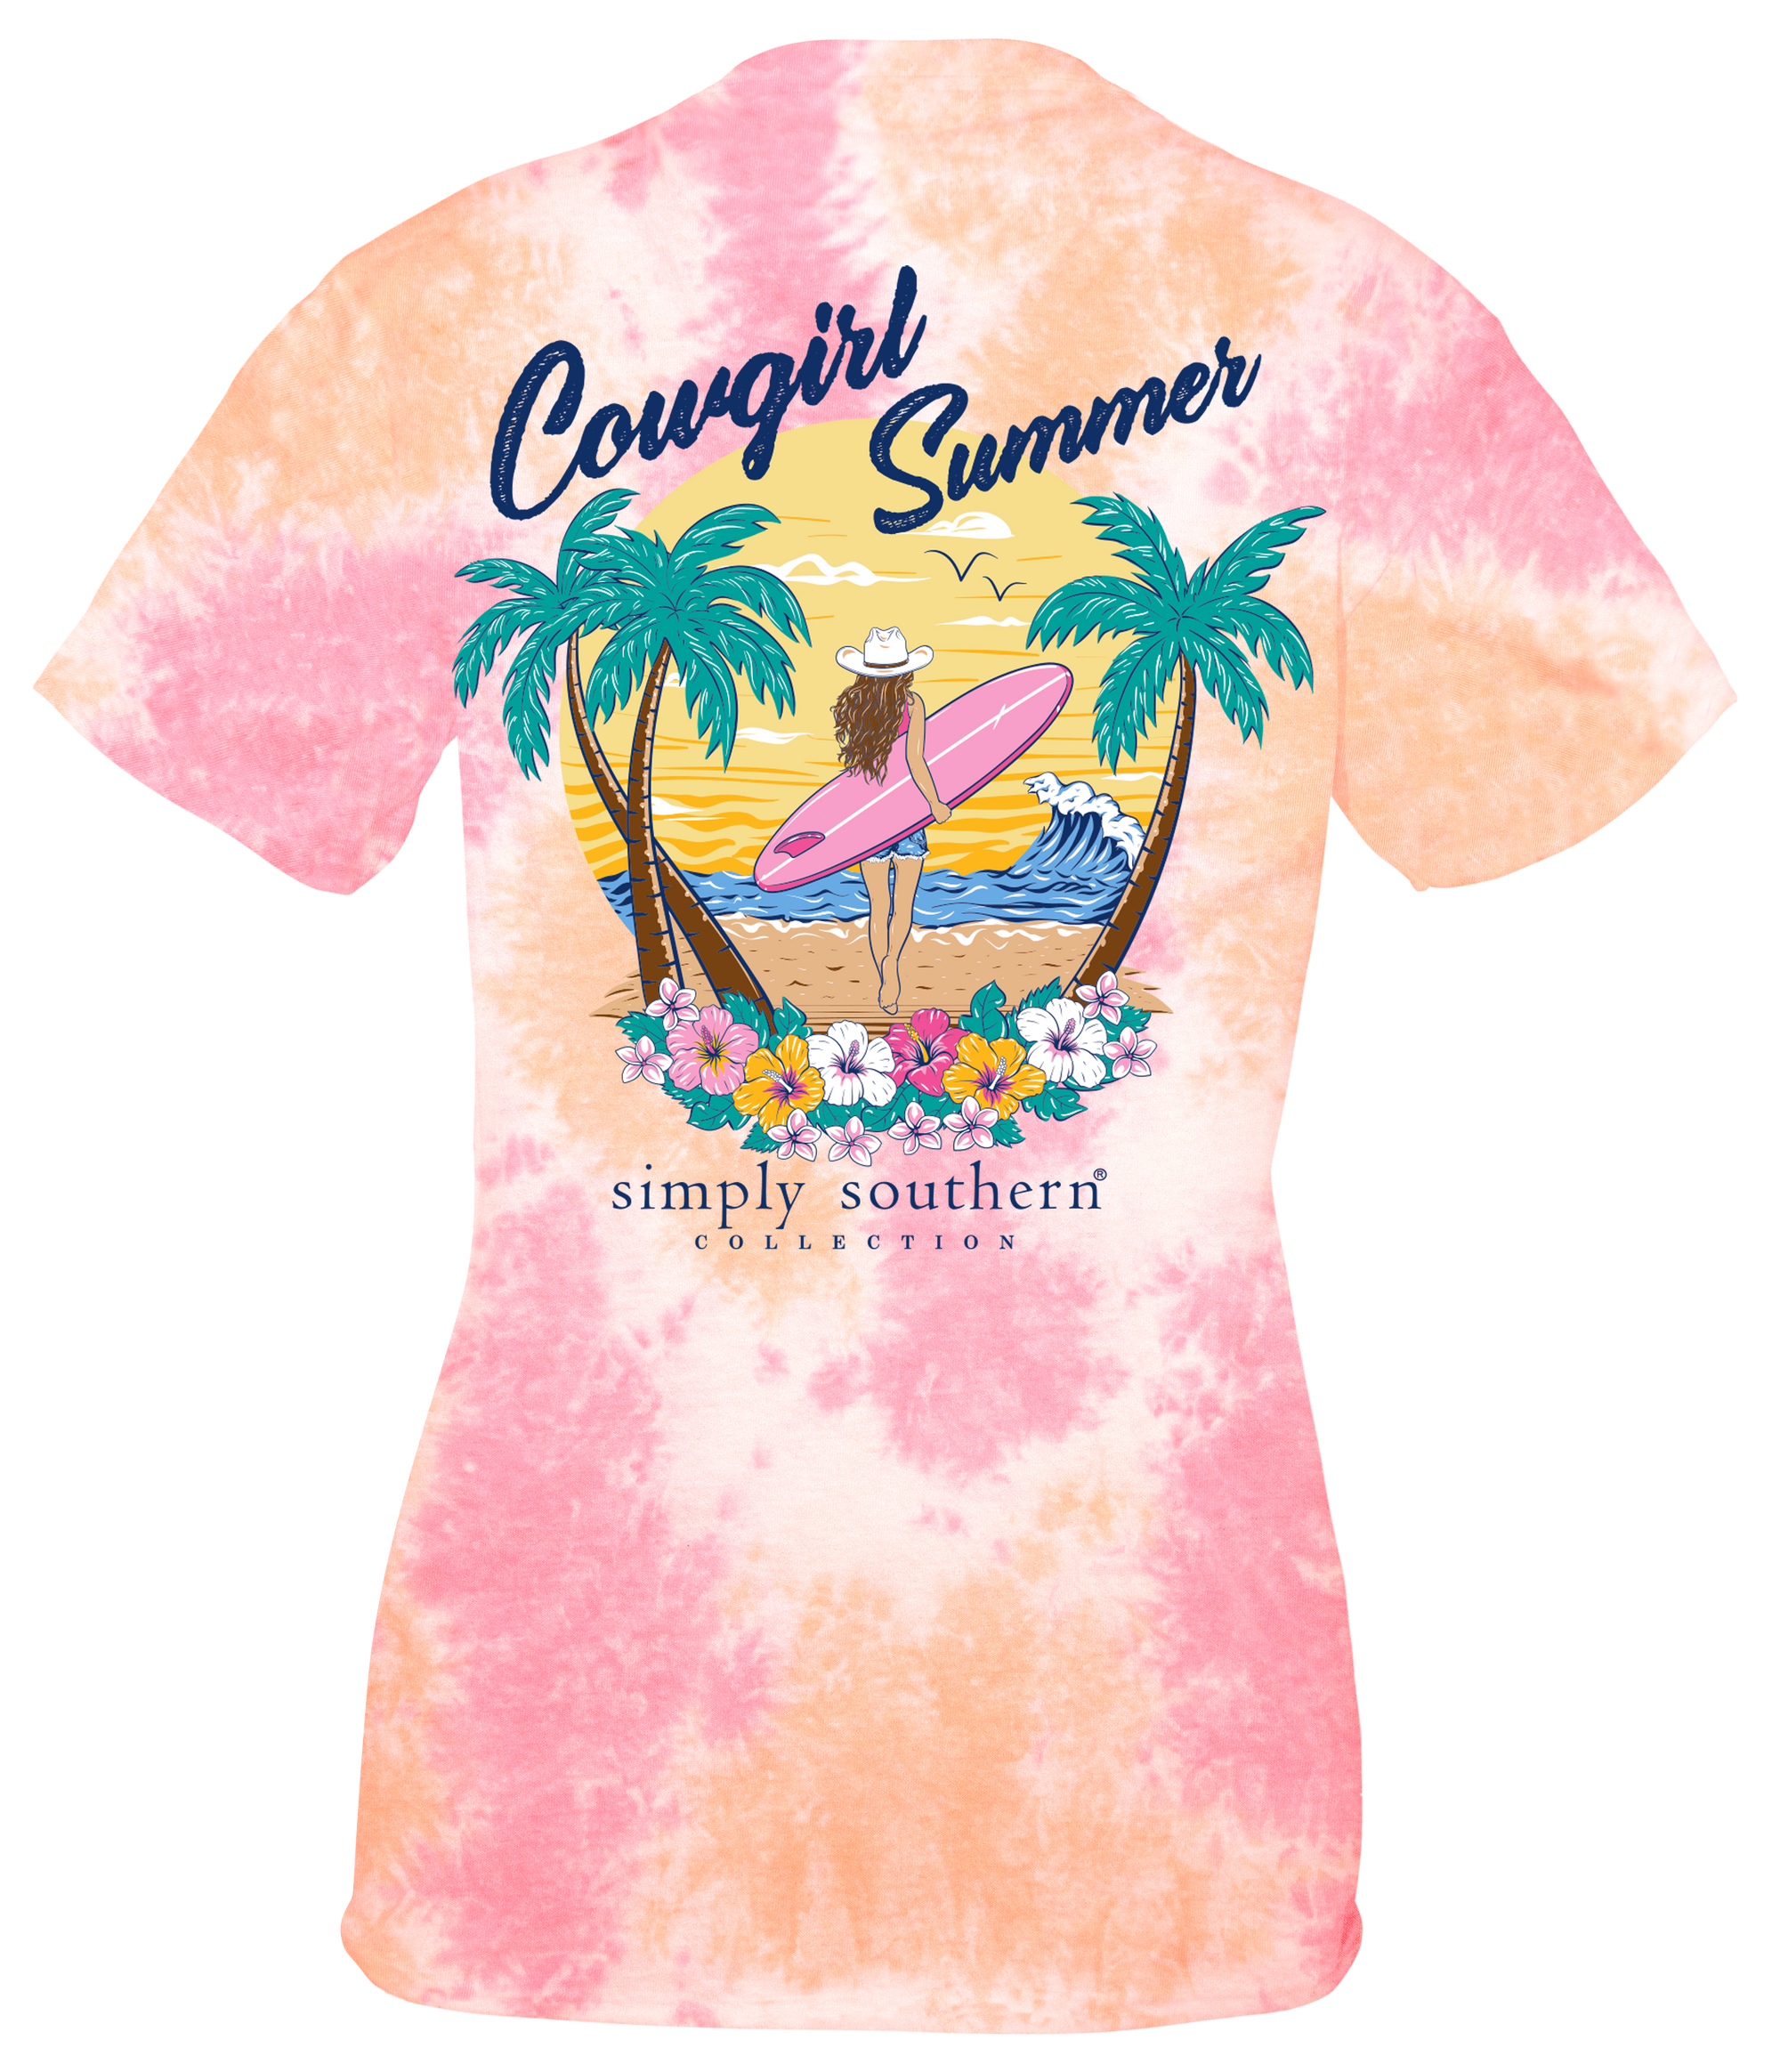 Simply Southern Cow Girl Summer Tie Dye T-Shirt